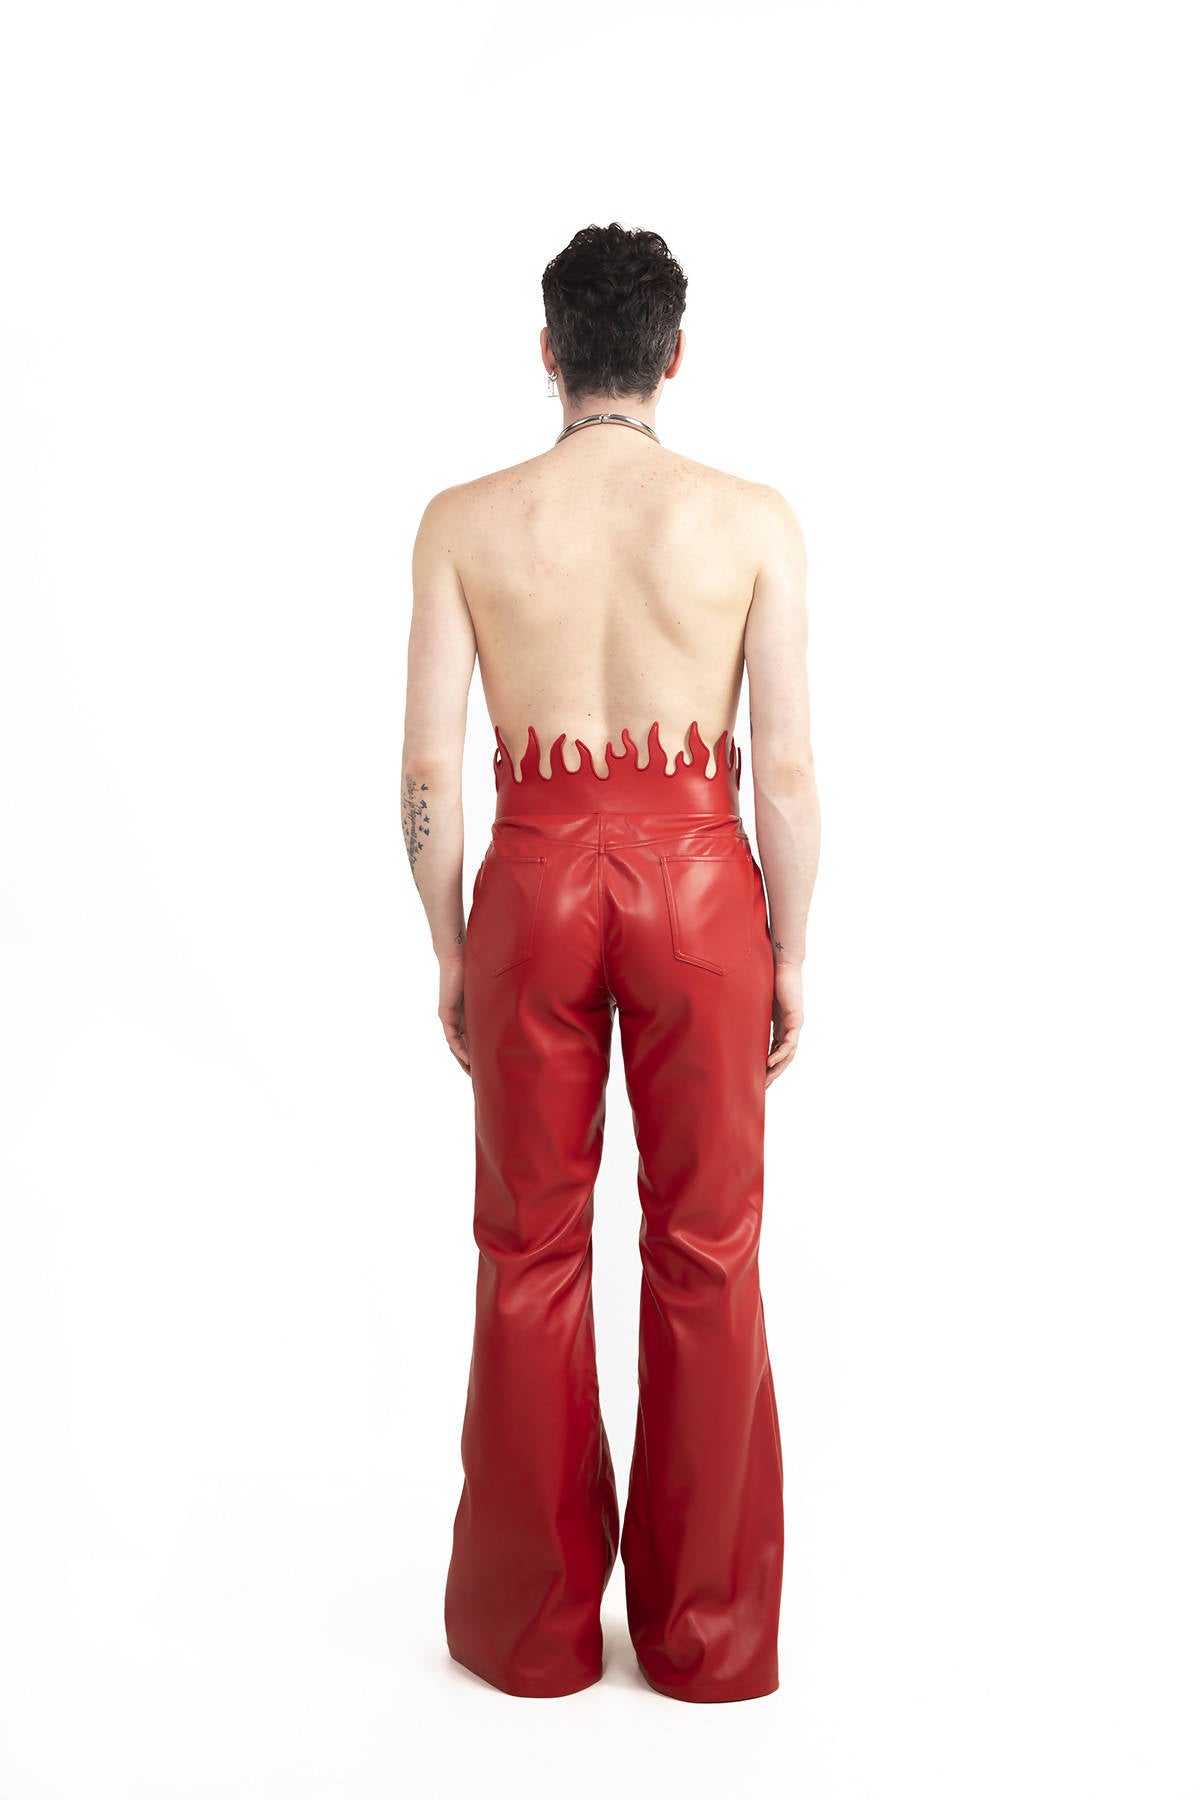 FBMT Clothing FBMT Hot Flame Faux Leather Pants (Red) 